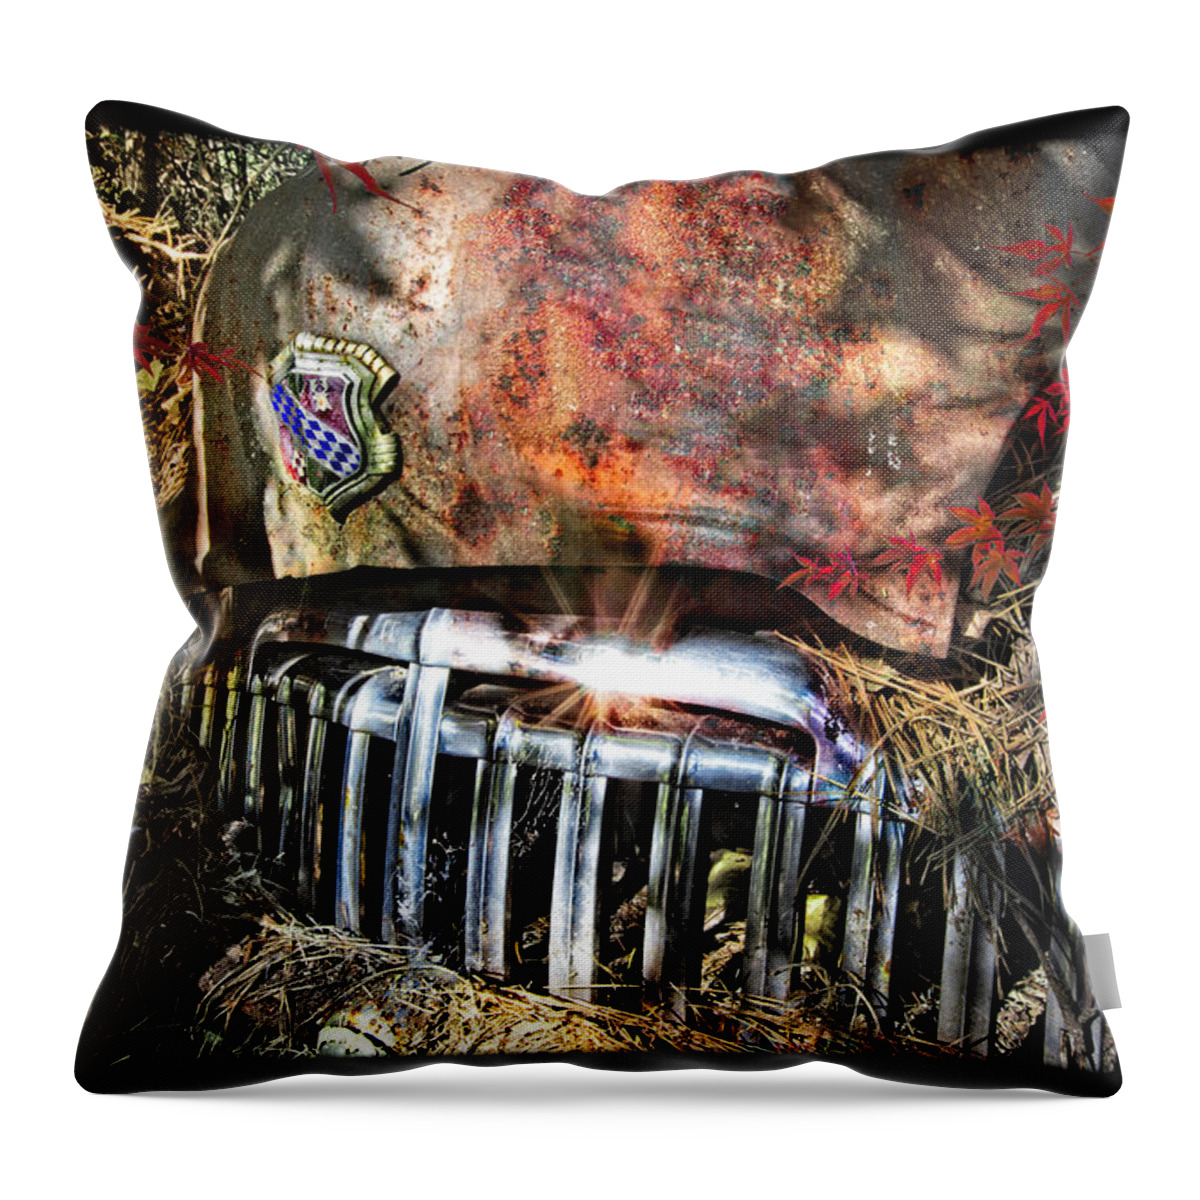 1942 Throw Pillow featuring the photograph 1942 Buick by Debra and Dave Vanderlaan